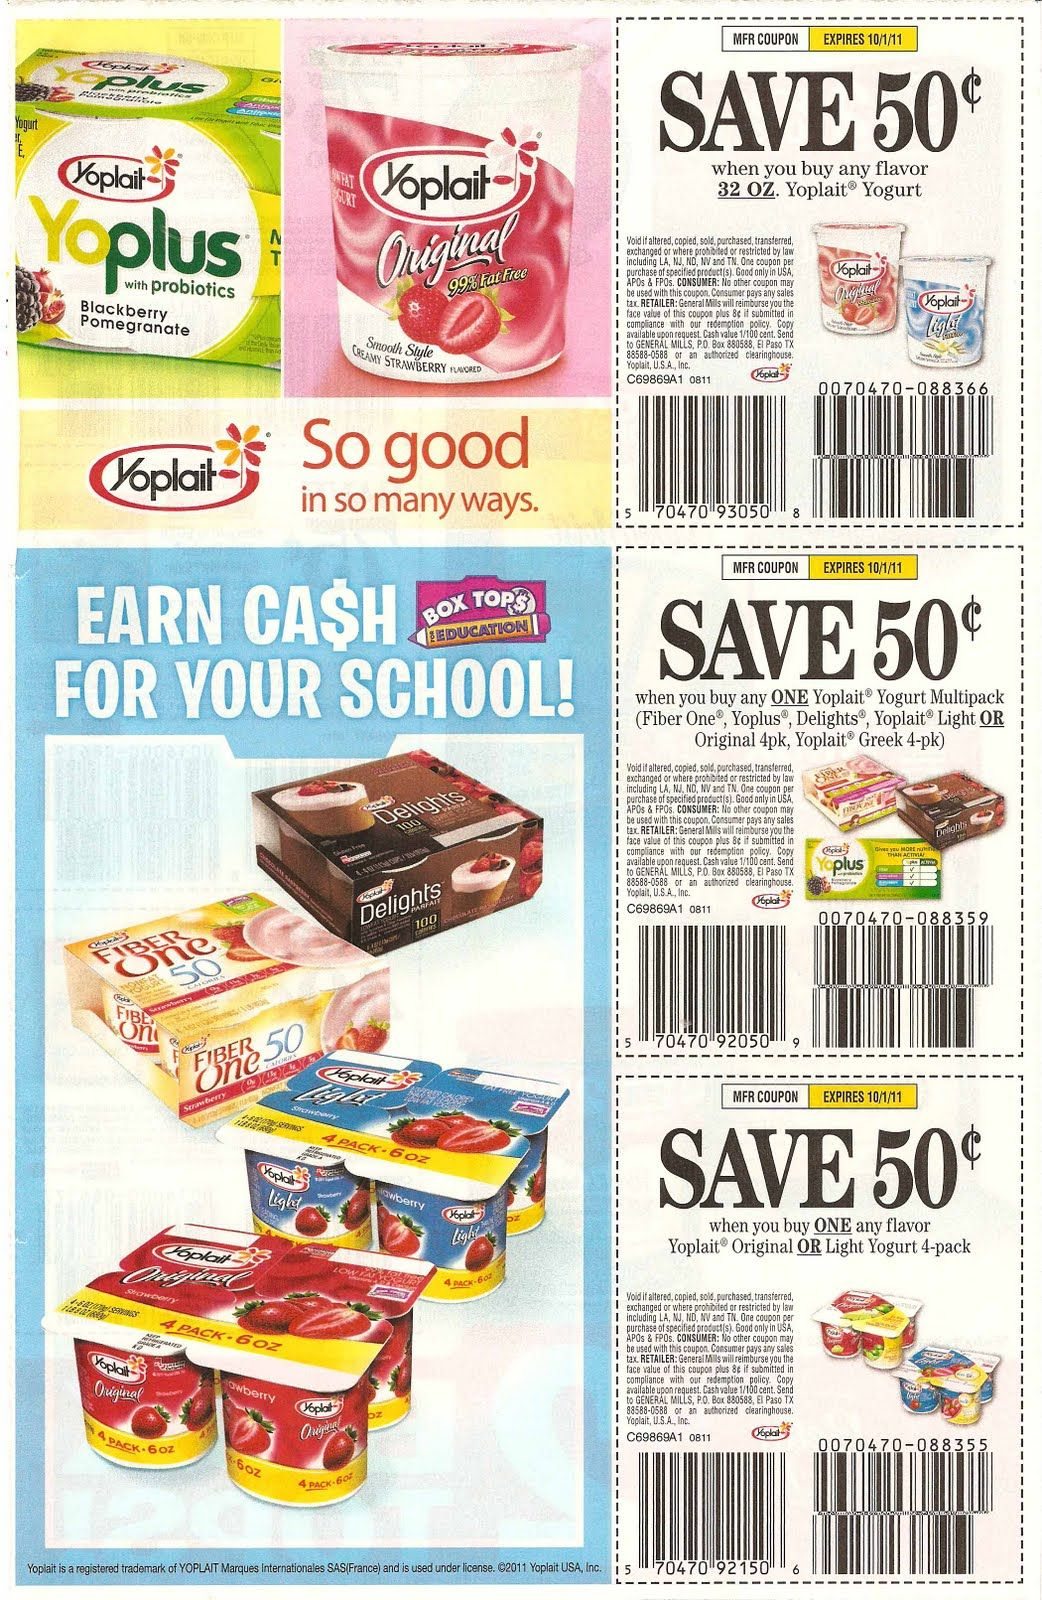 Free Printable Grocery Coupons For Groceries, Food, Family And - Free Printable Grocery Coupons